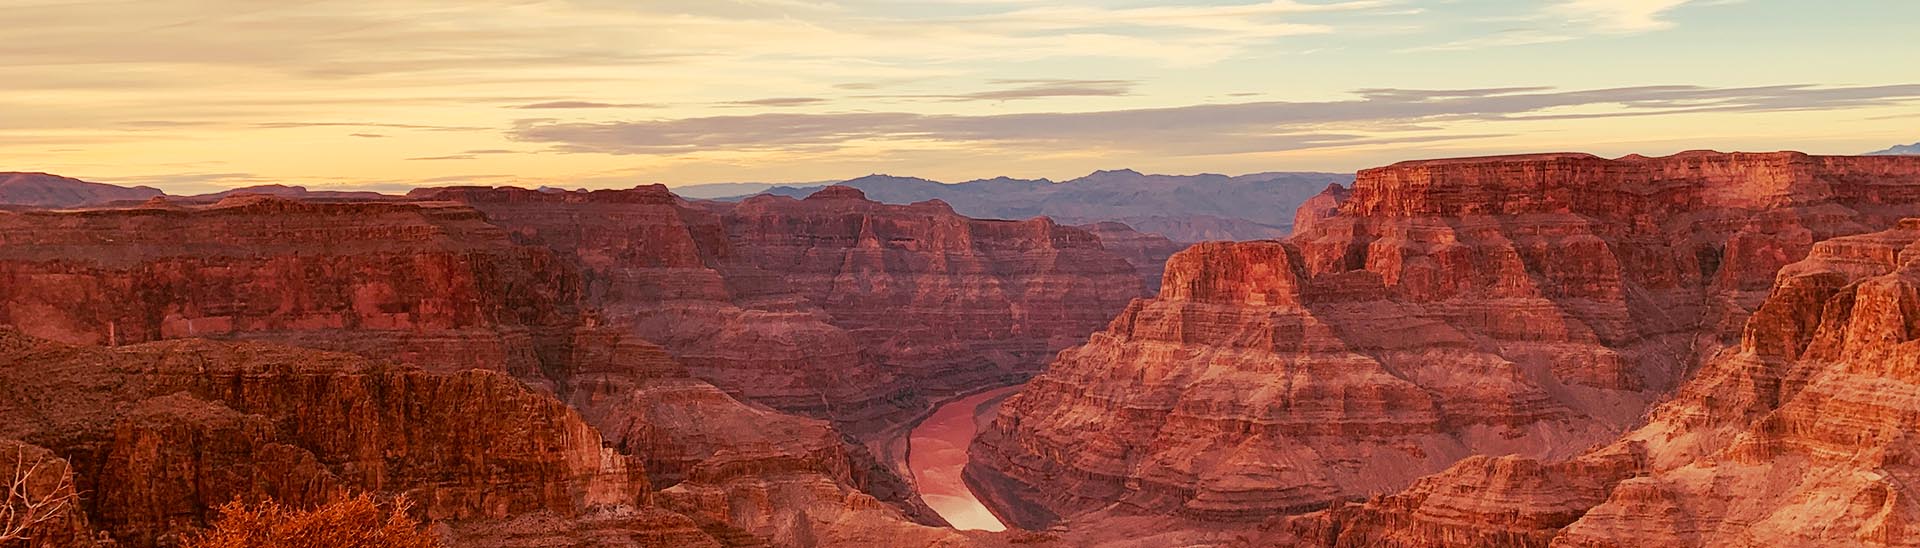 Cheap Flights To Grand Canyon (GCN)